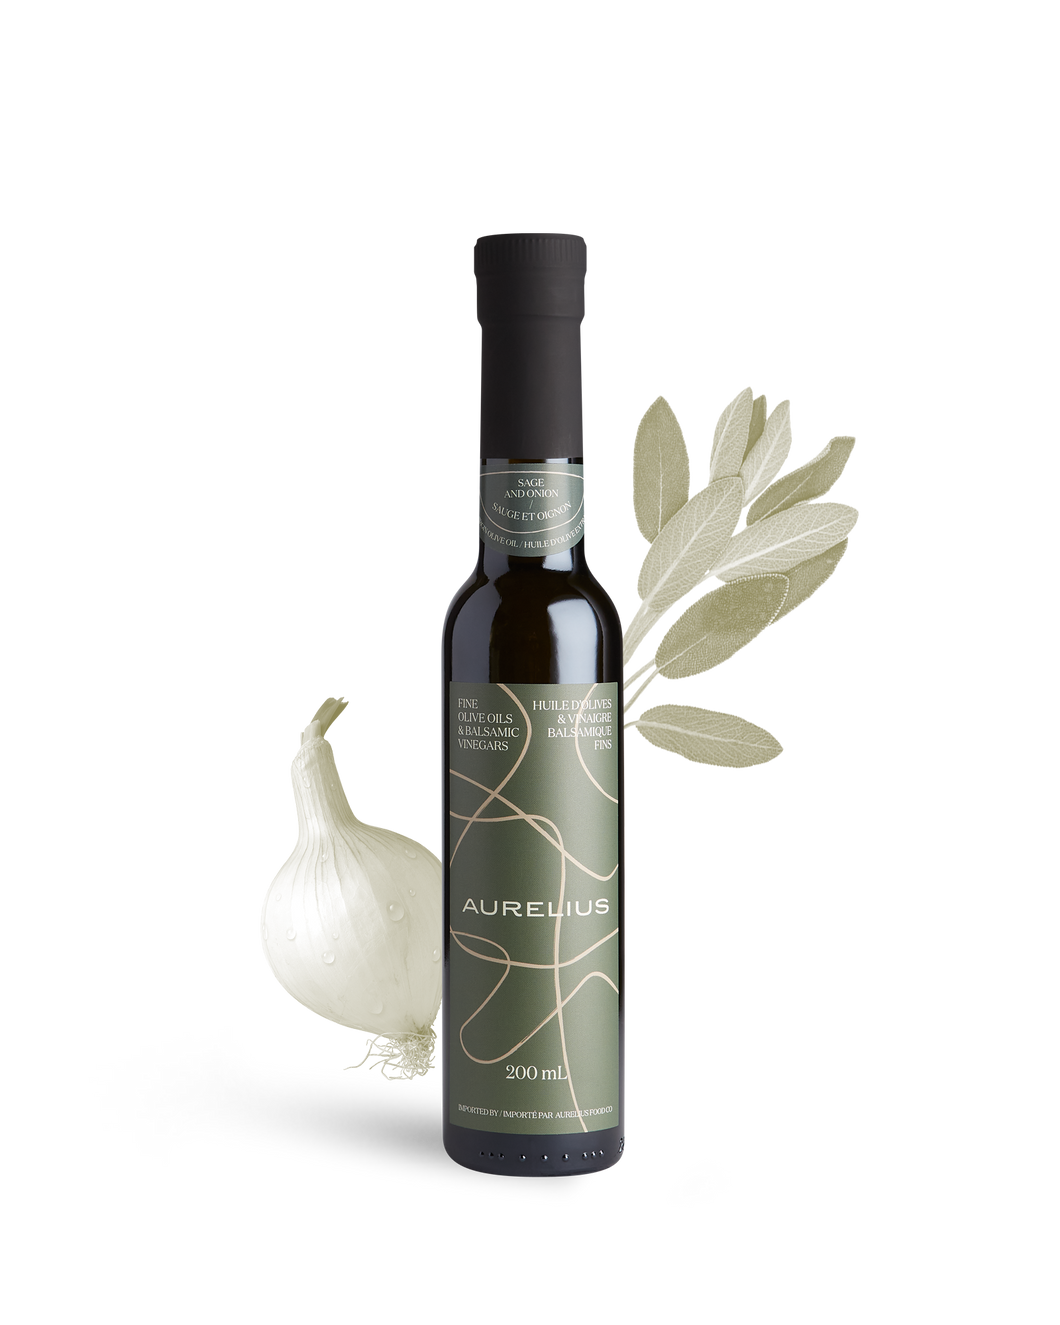 Sage and Onion Extra Virgin Olive Oil